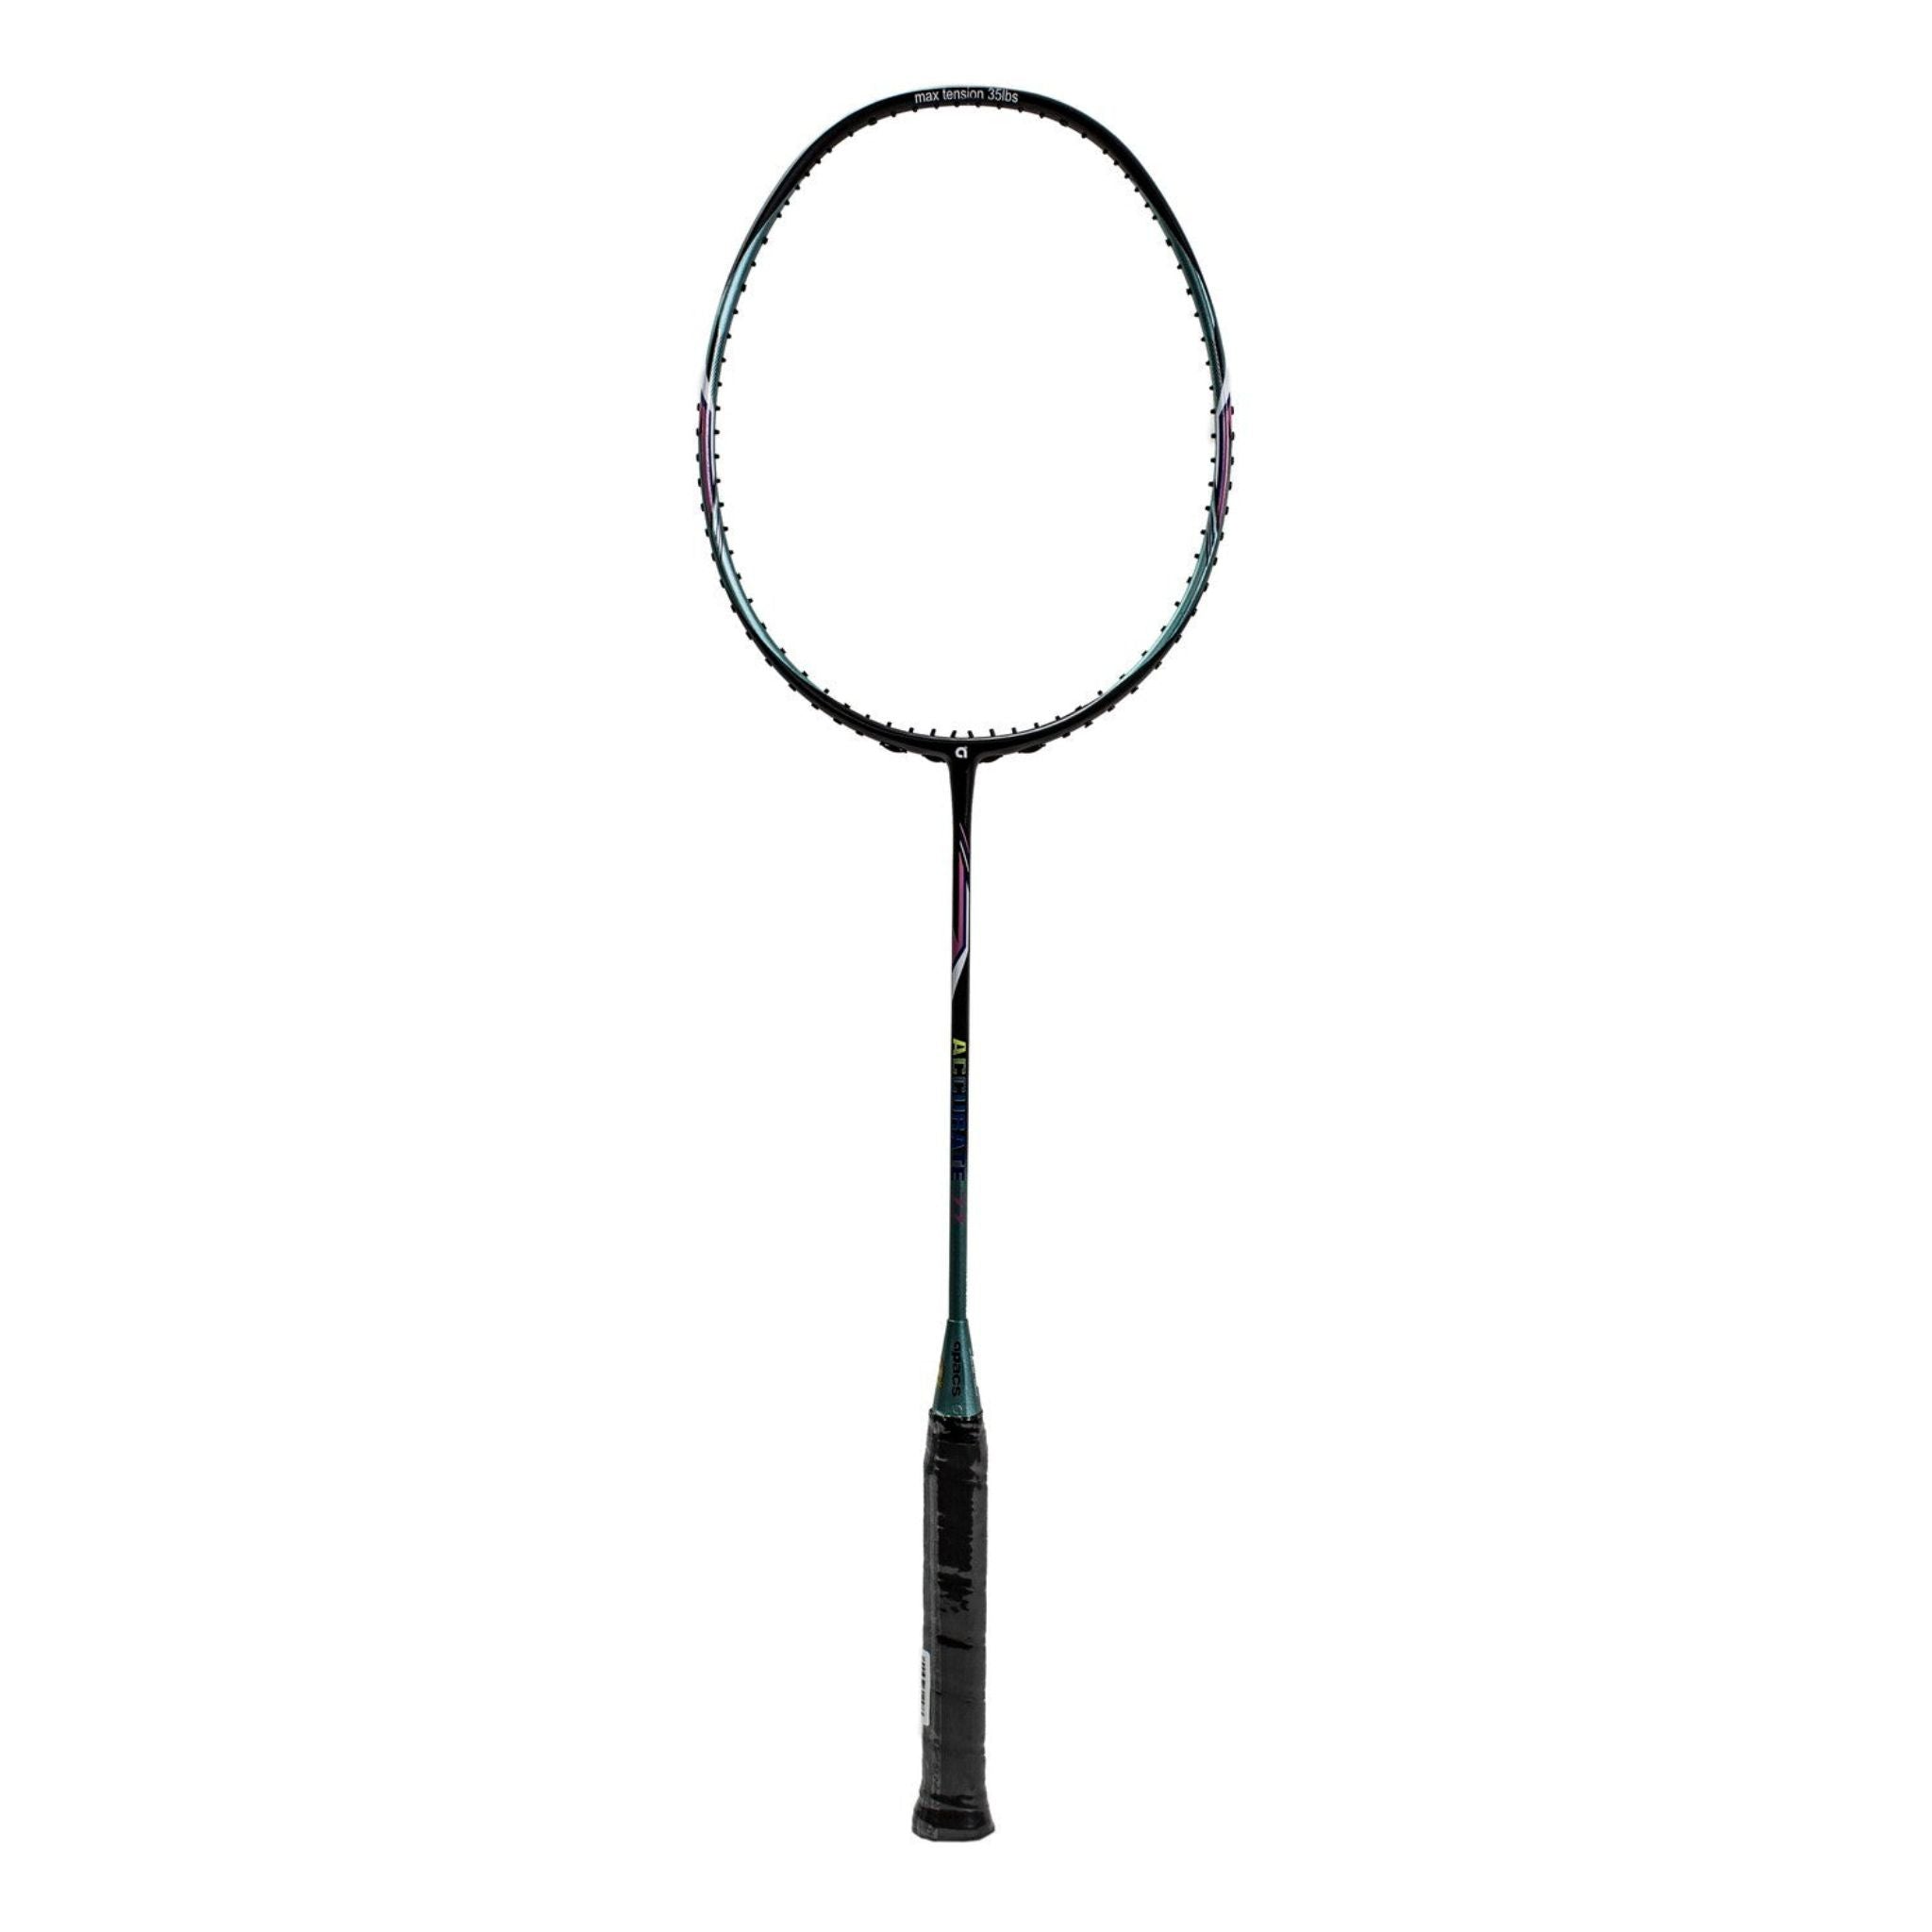 APACS Precision Badminton - The Definitive Selection for Accuracy and Excellence